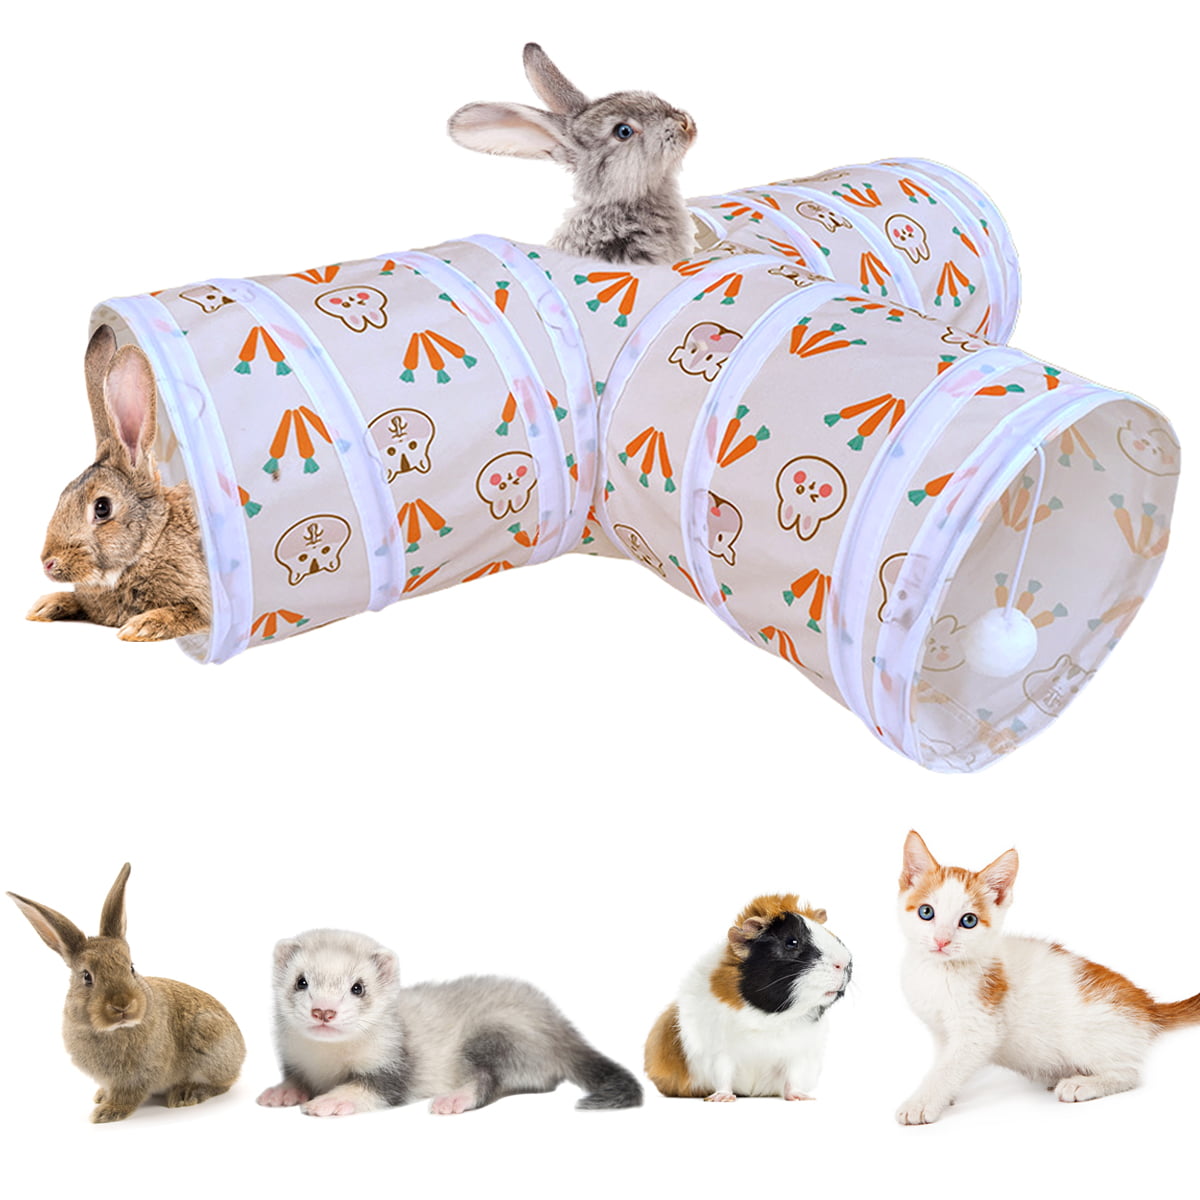 Collapsible Bunny Hideout Tunnels & Tubes Guinea Pig Tunnel GNB PET Bunny Tunnel Rabbit Tunnel Small Animal Activity Tunnel Hideaway Toys for Dwarf Rabbits Bunny Guinea Pig Ferret Kitty Puppy 